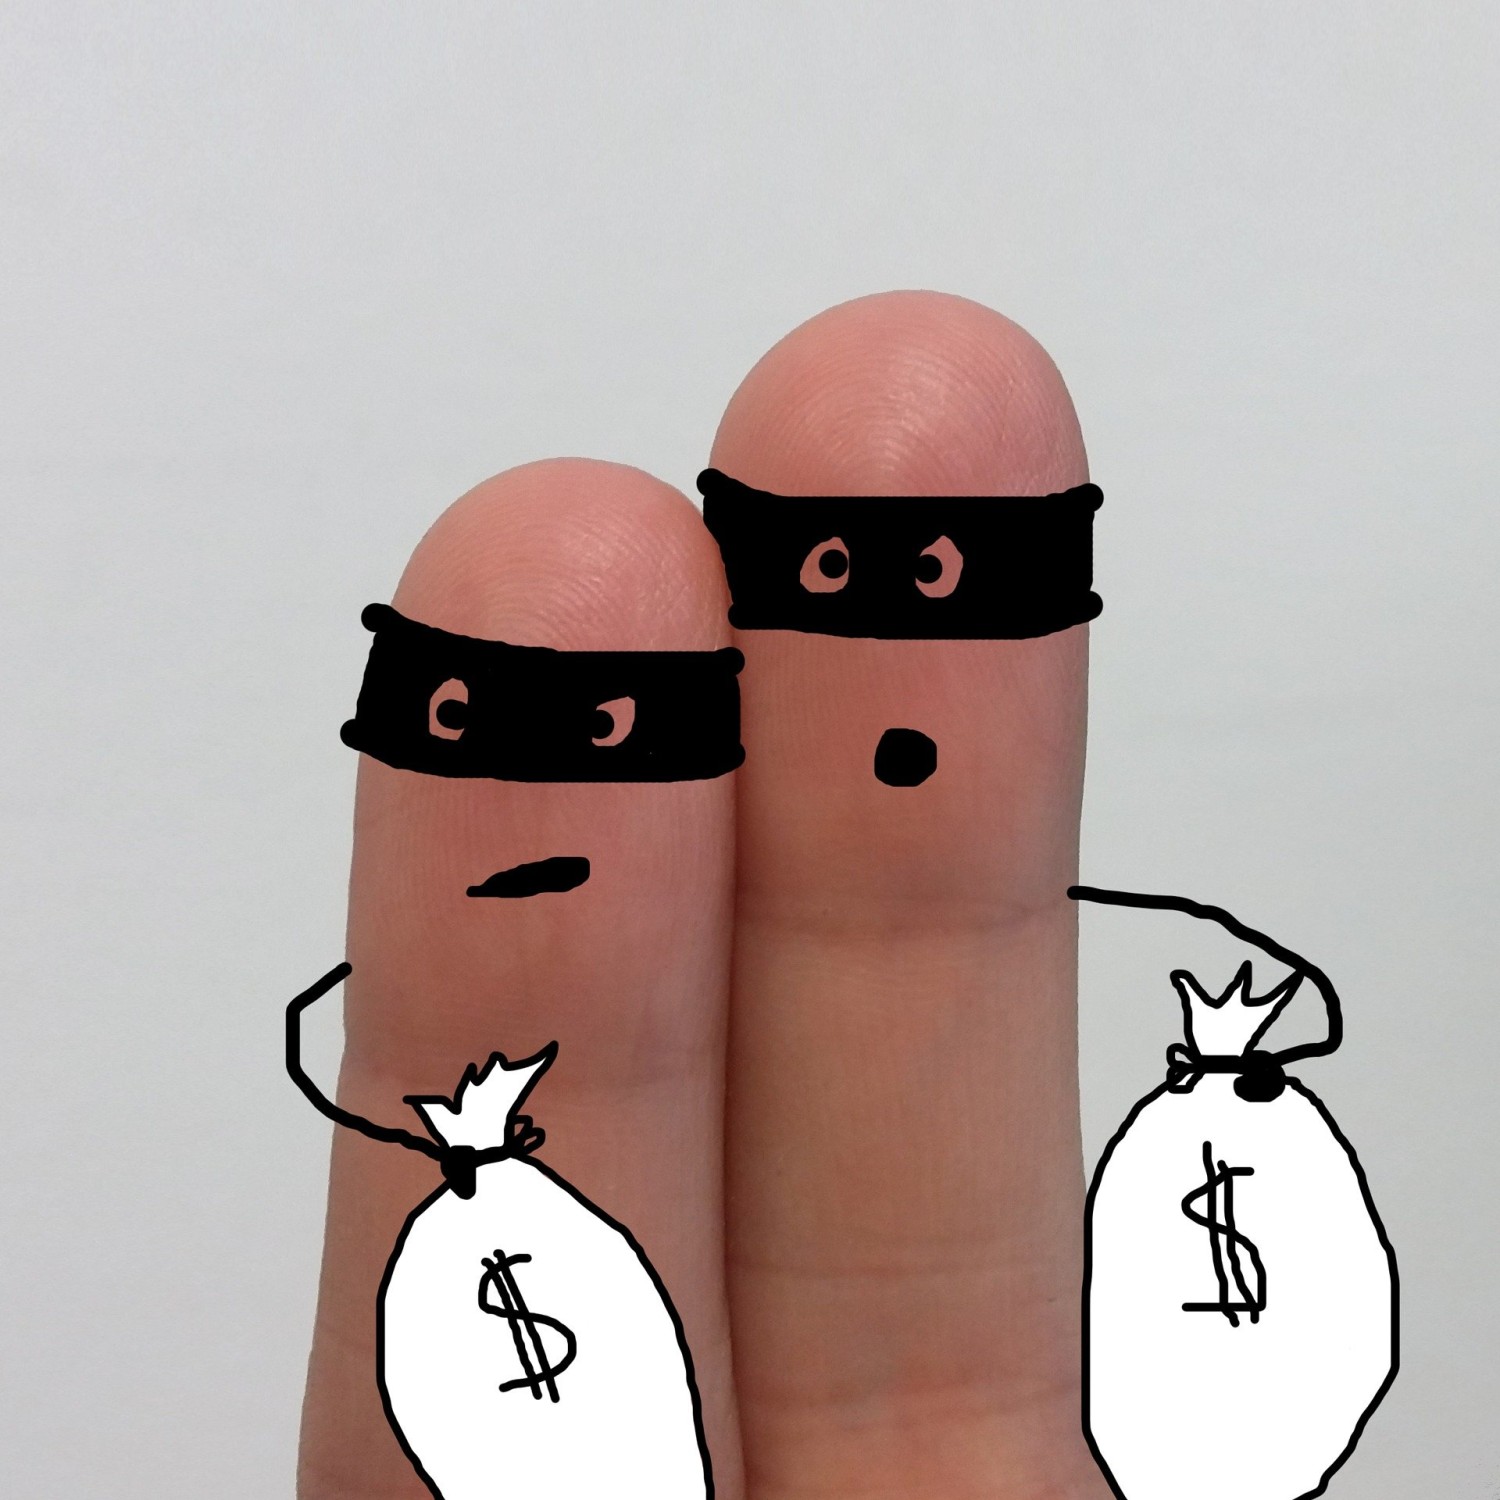 Two robbers holding loot